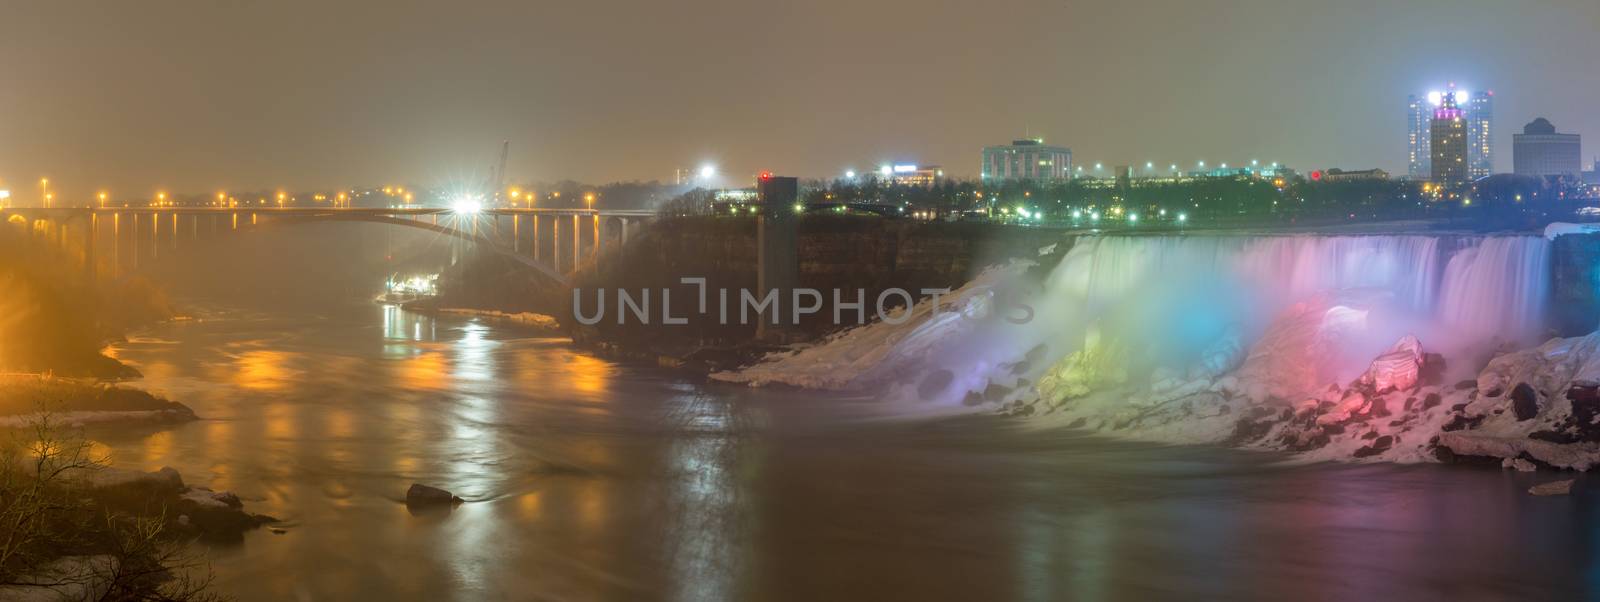 Panorama Illumination light of american Falls as viewed from Table Rock in Queen Victoria Park in Niagara Falls at night, Ontario, Canada 